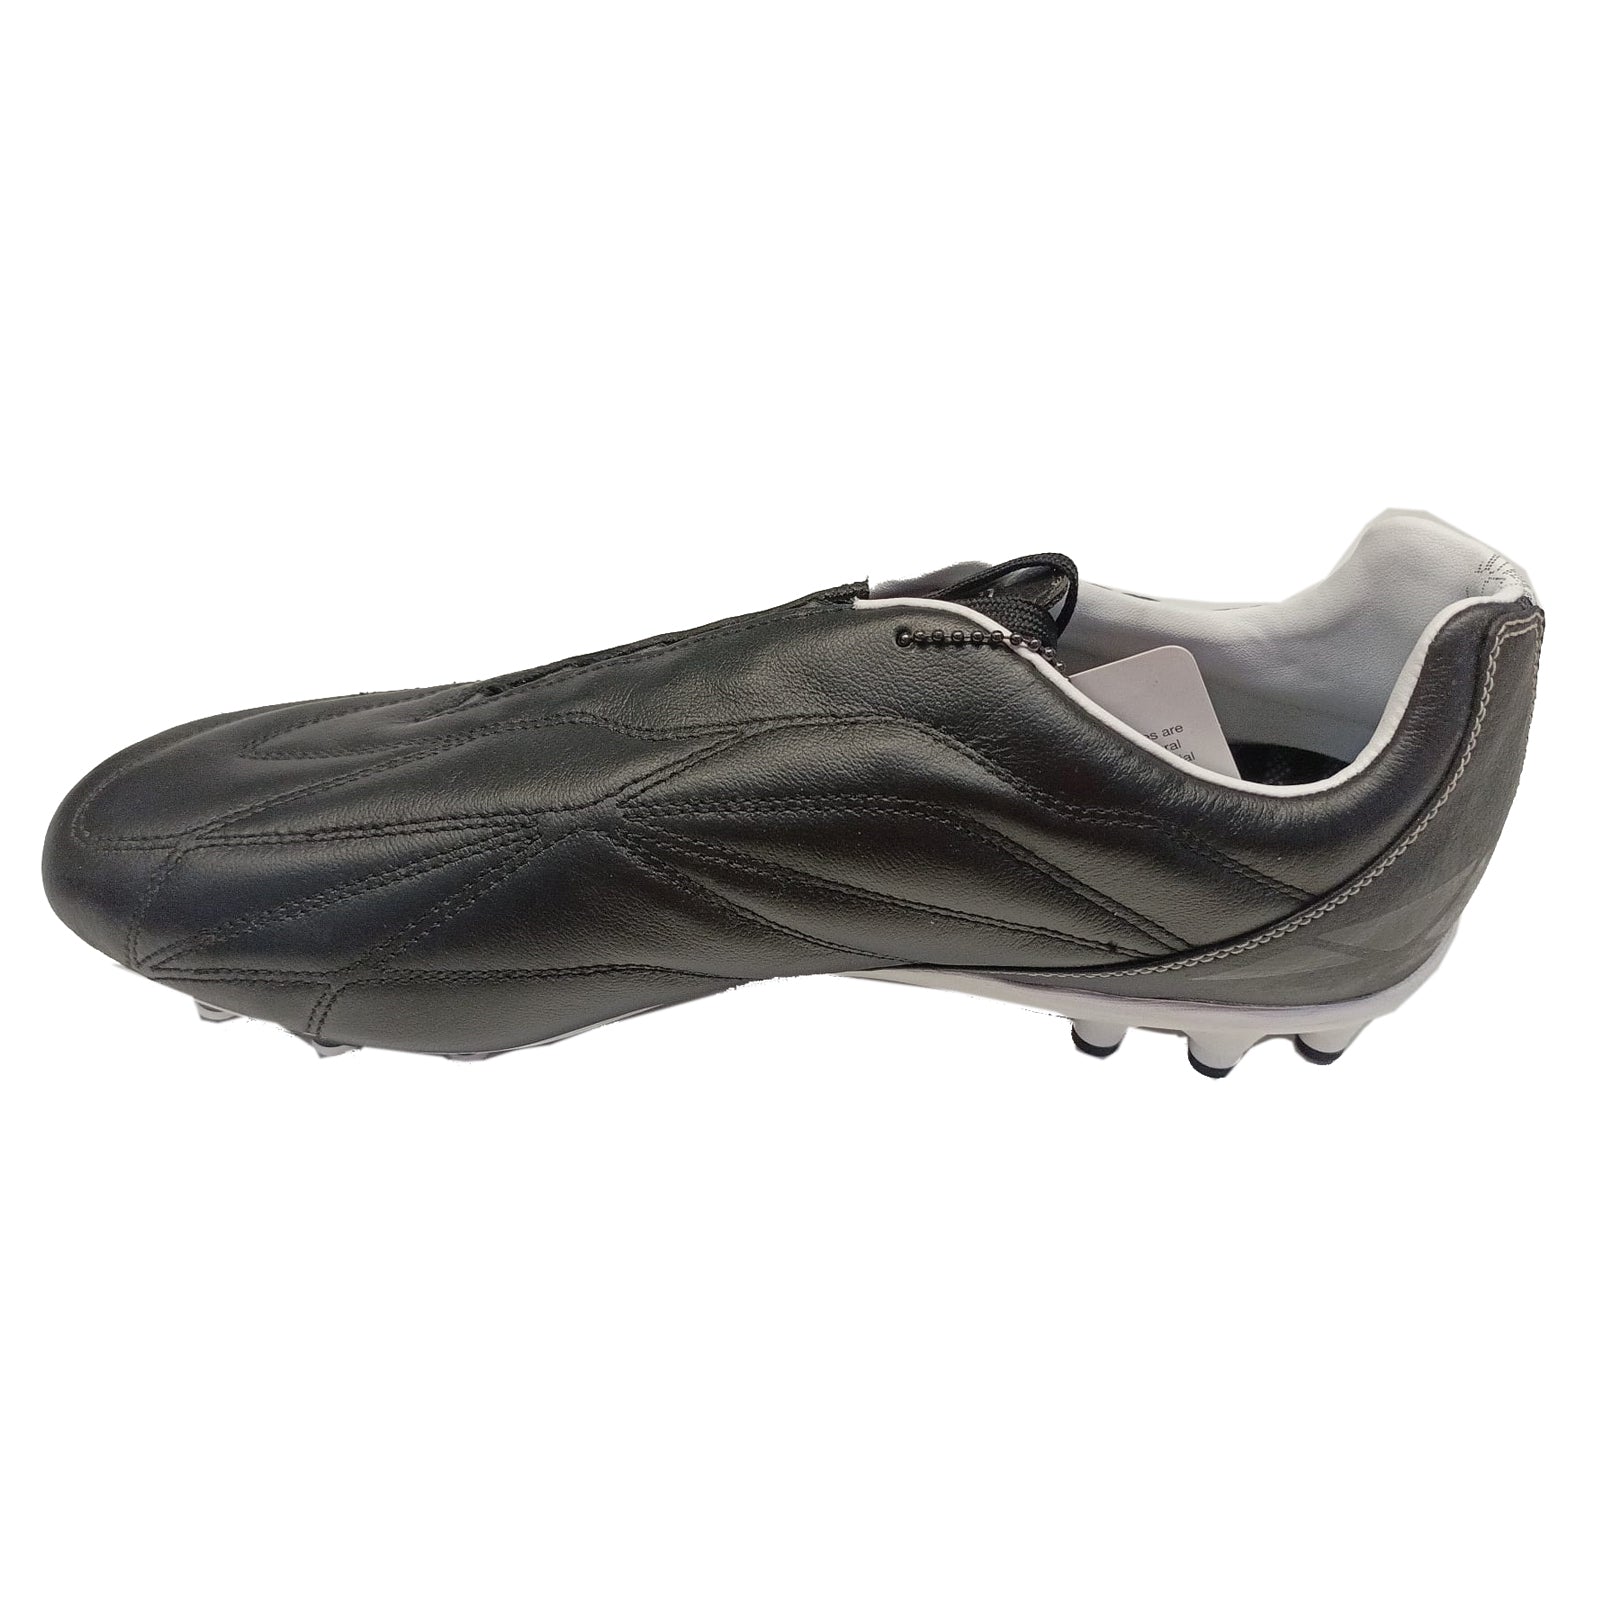 Pele Sports 1962 Artificial Men's Football Boots - Black/White/Frost Grey